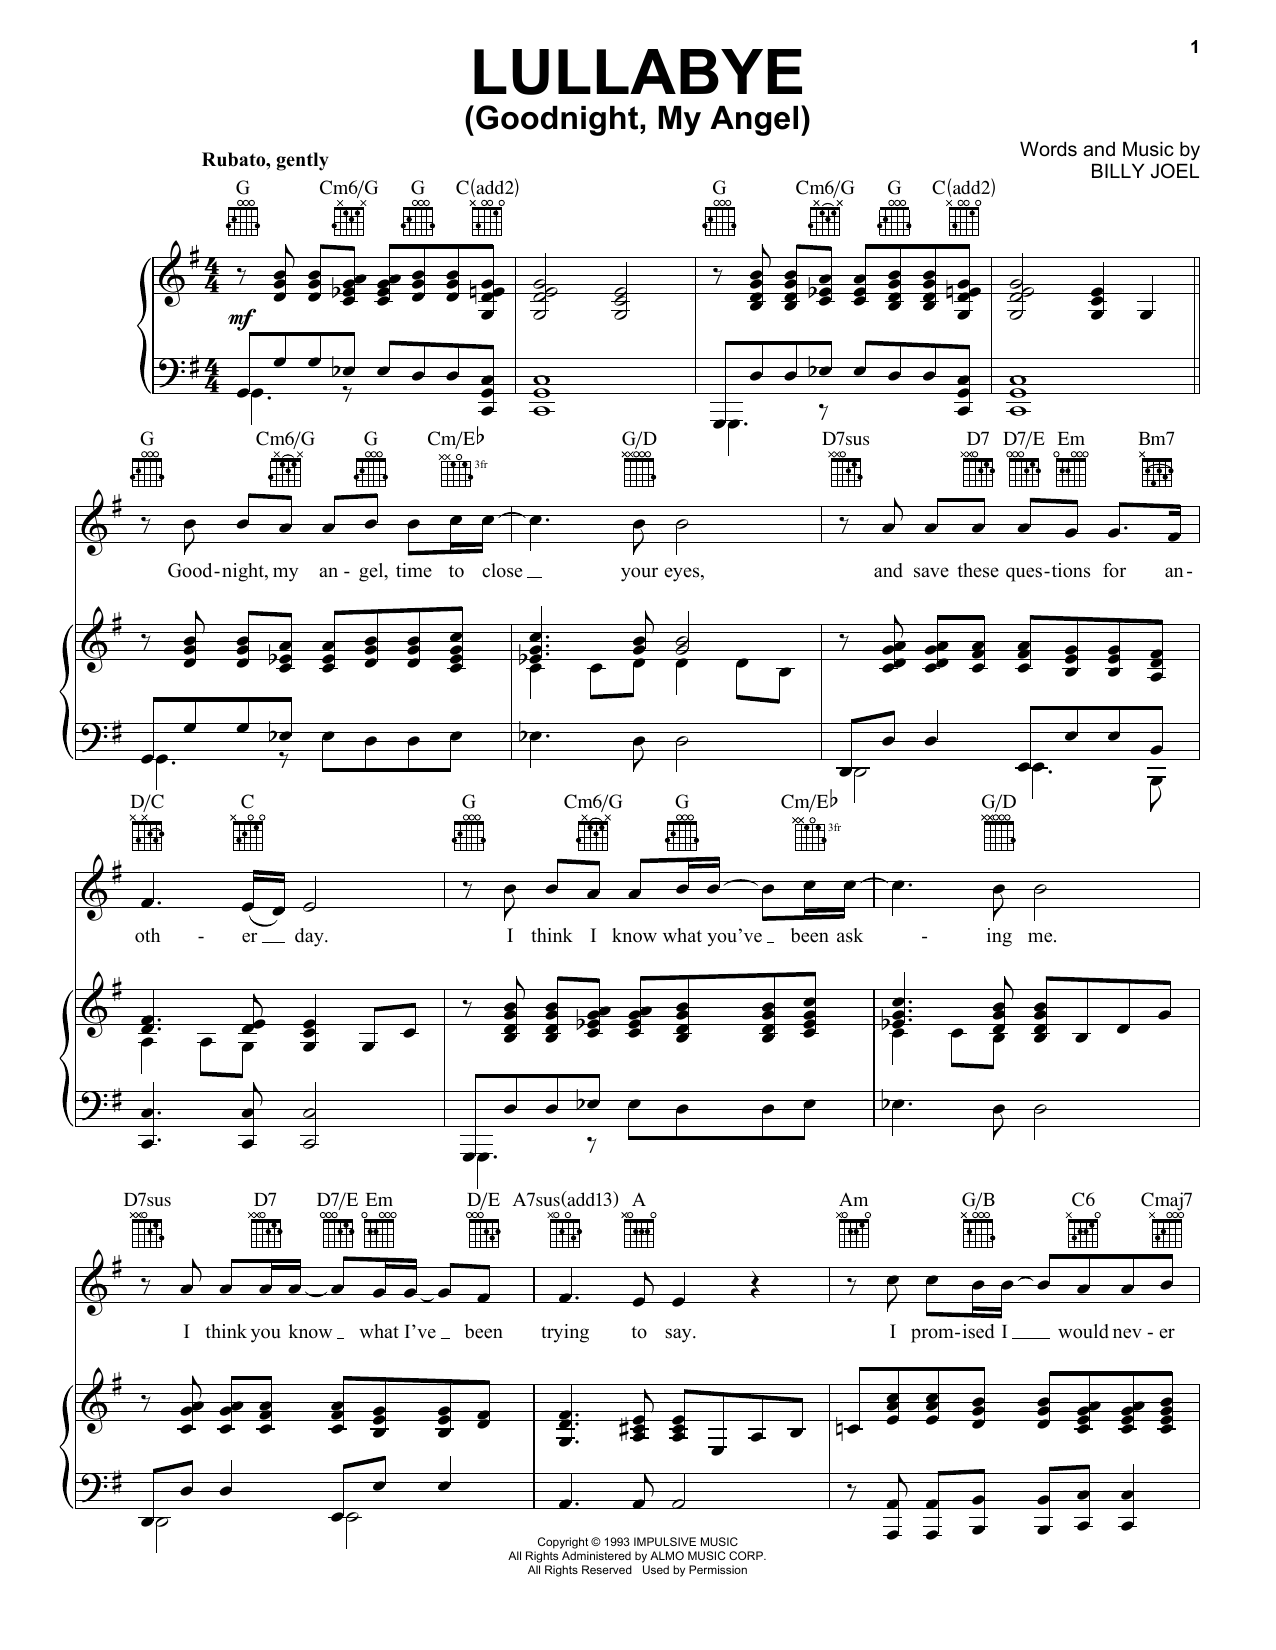 Billy Joel Lullabye (Goodnight, My Angel) sheet music notes and chords. Download Printable PDF.